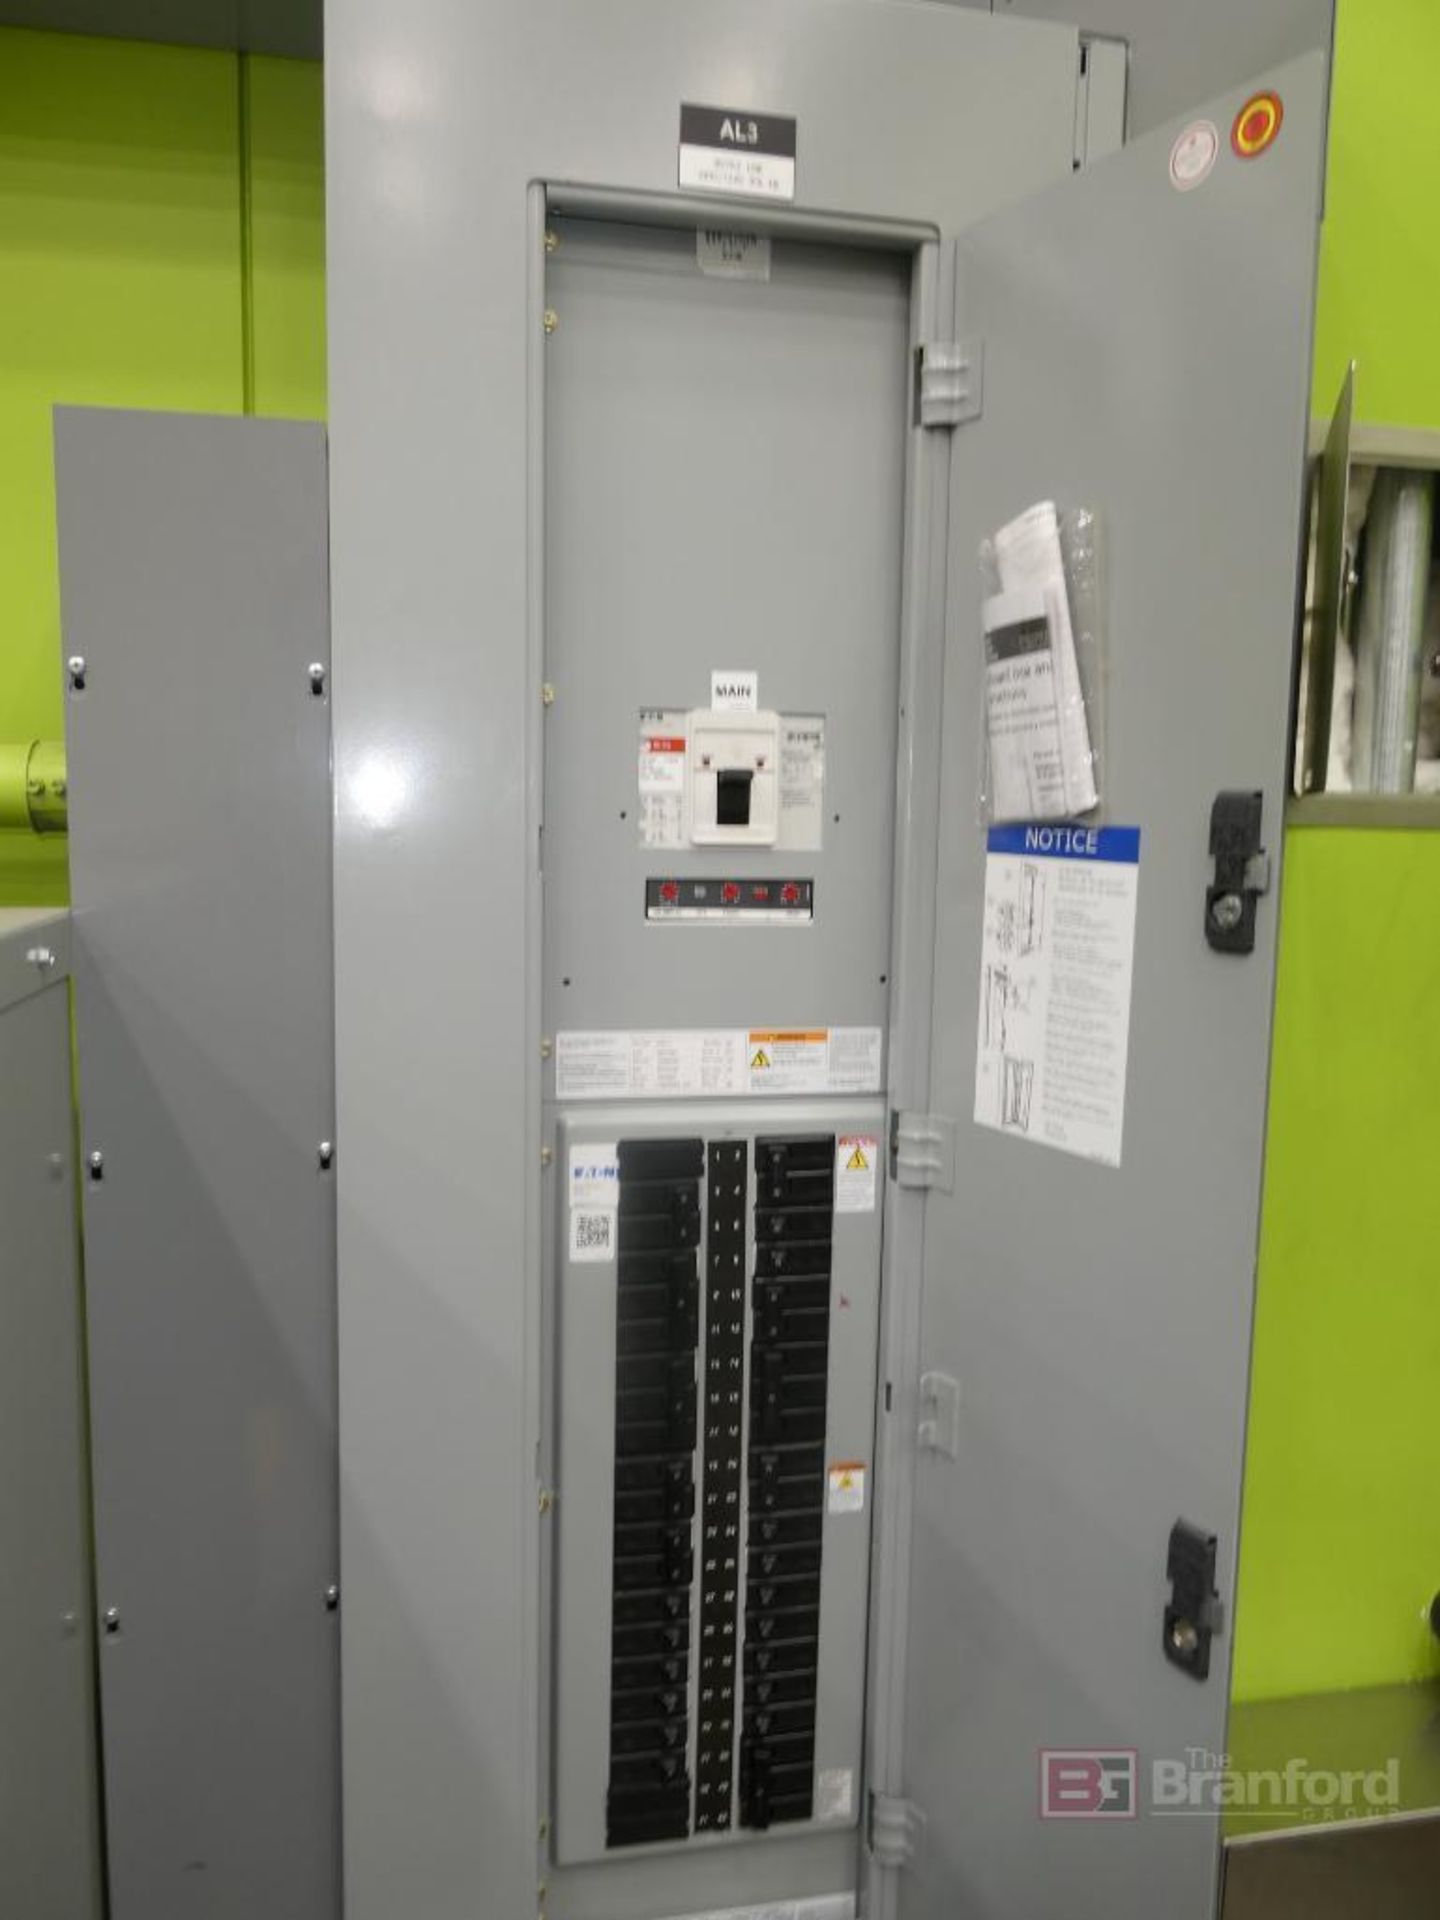 2020 Eaton Electrical Panels and Type DT-3 Transformer - Image 4 of 4